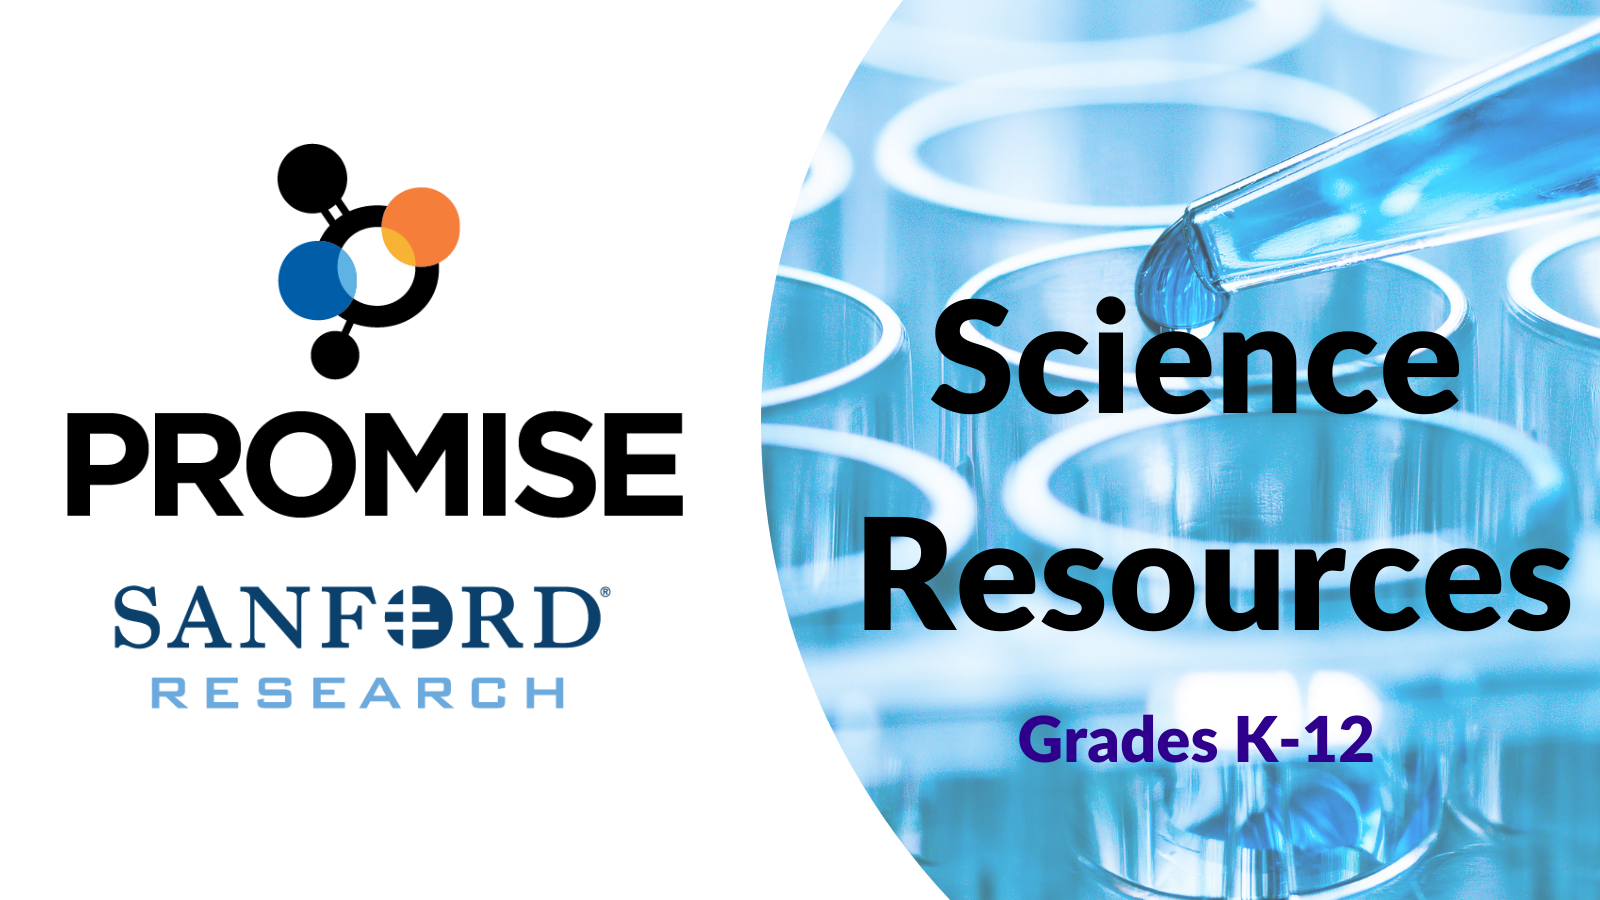 Decorative graphic for Sanford Promise Science Resources